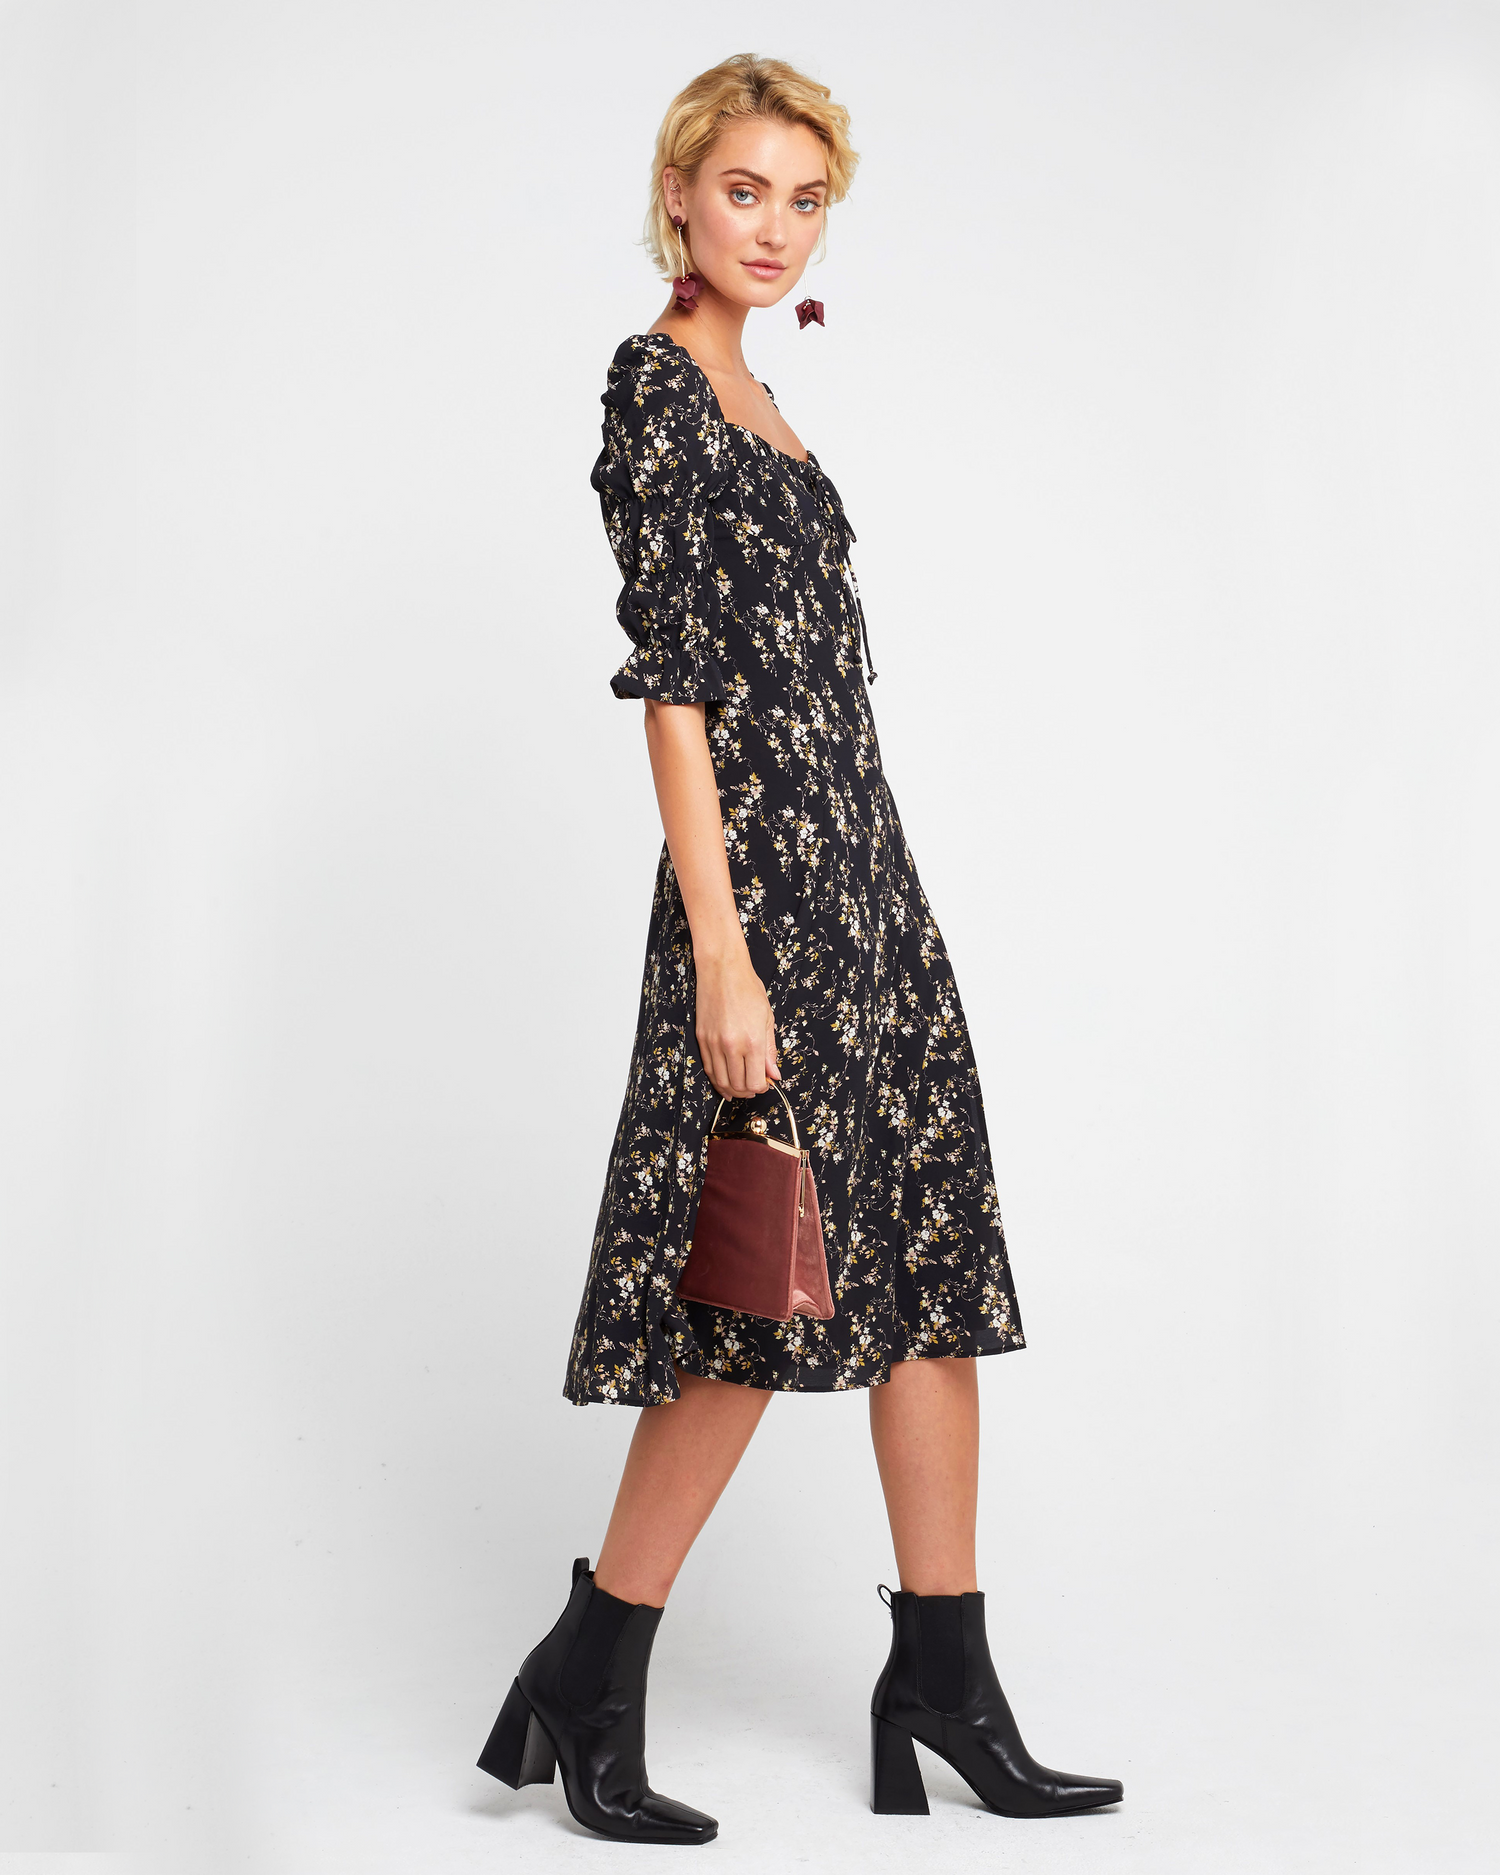 Third image of She's Picky Dress, a black midi dress, puff sleeves, 3/4 sleeves, fall, floral, side slit